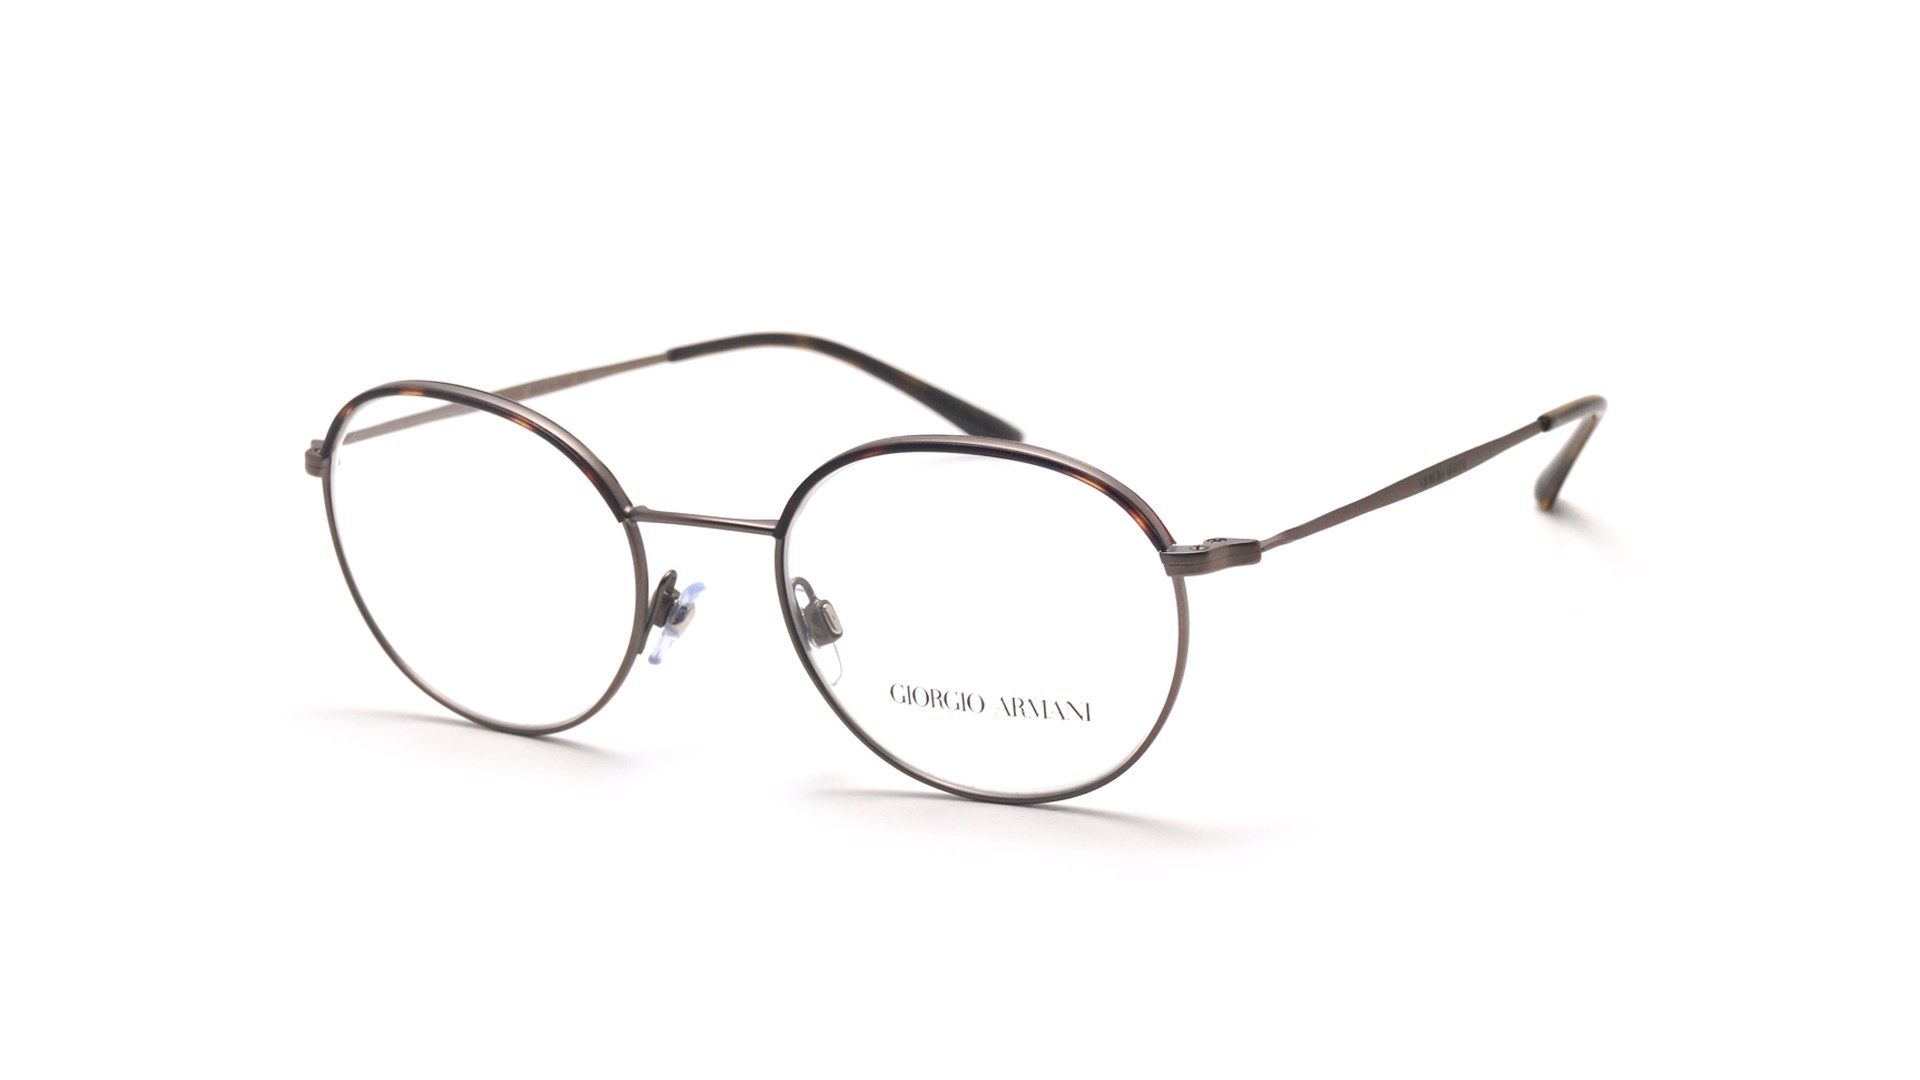 armani spectacle frames